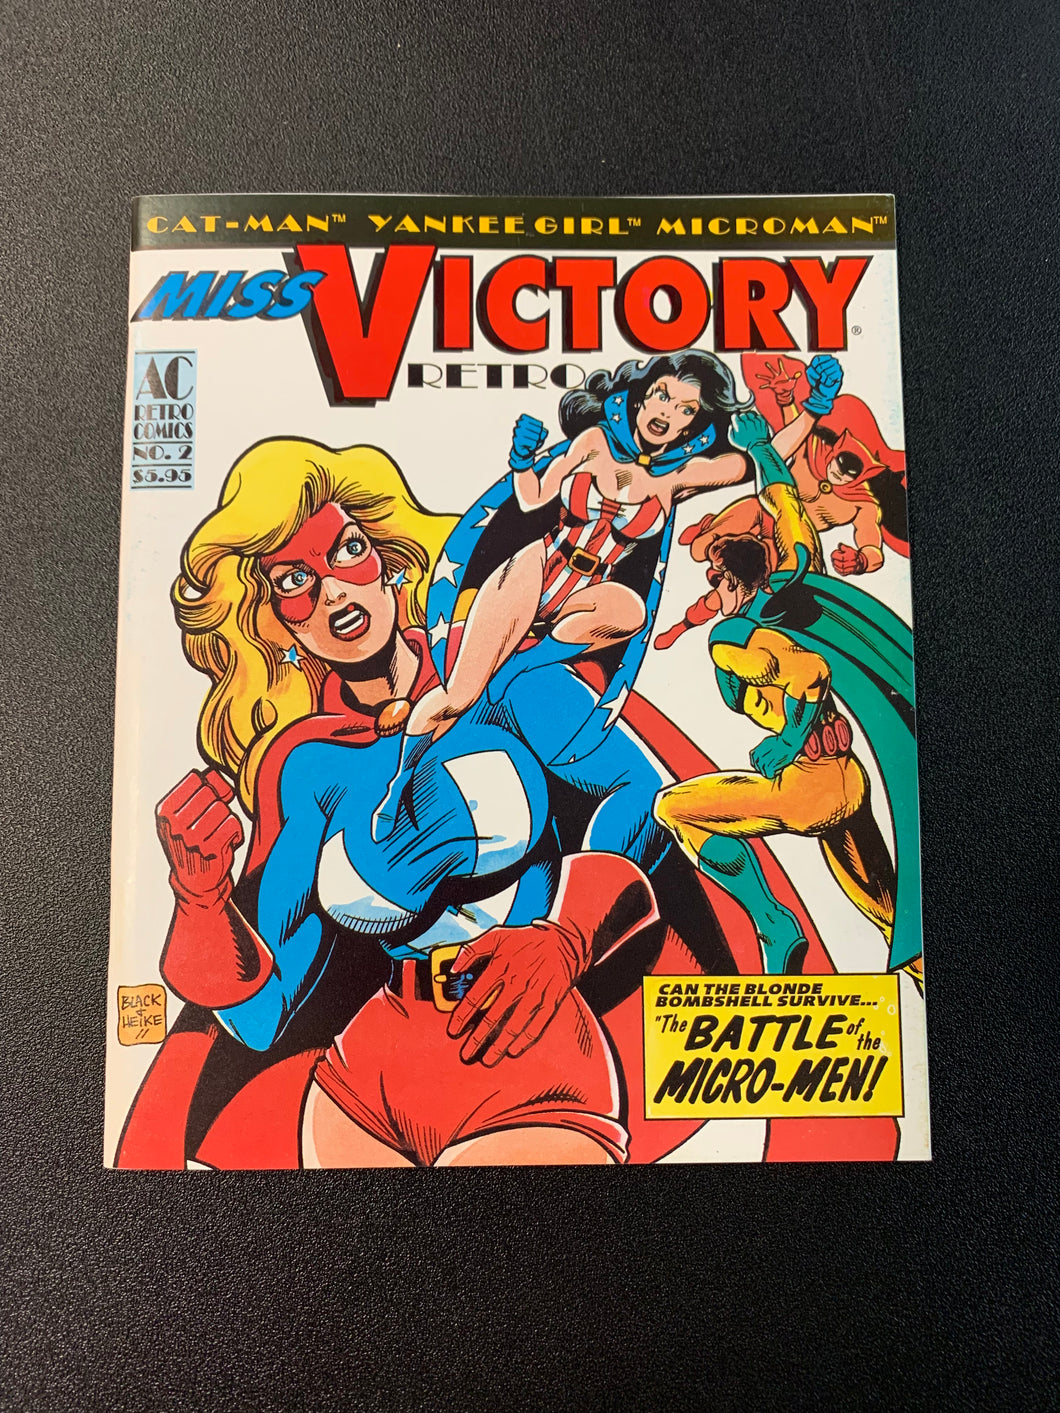 MISS VICTORY RETRO “THE BATTLE OF THE MICRO-MEN!” COMIC